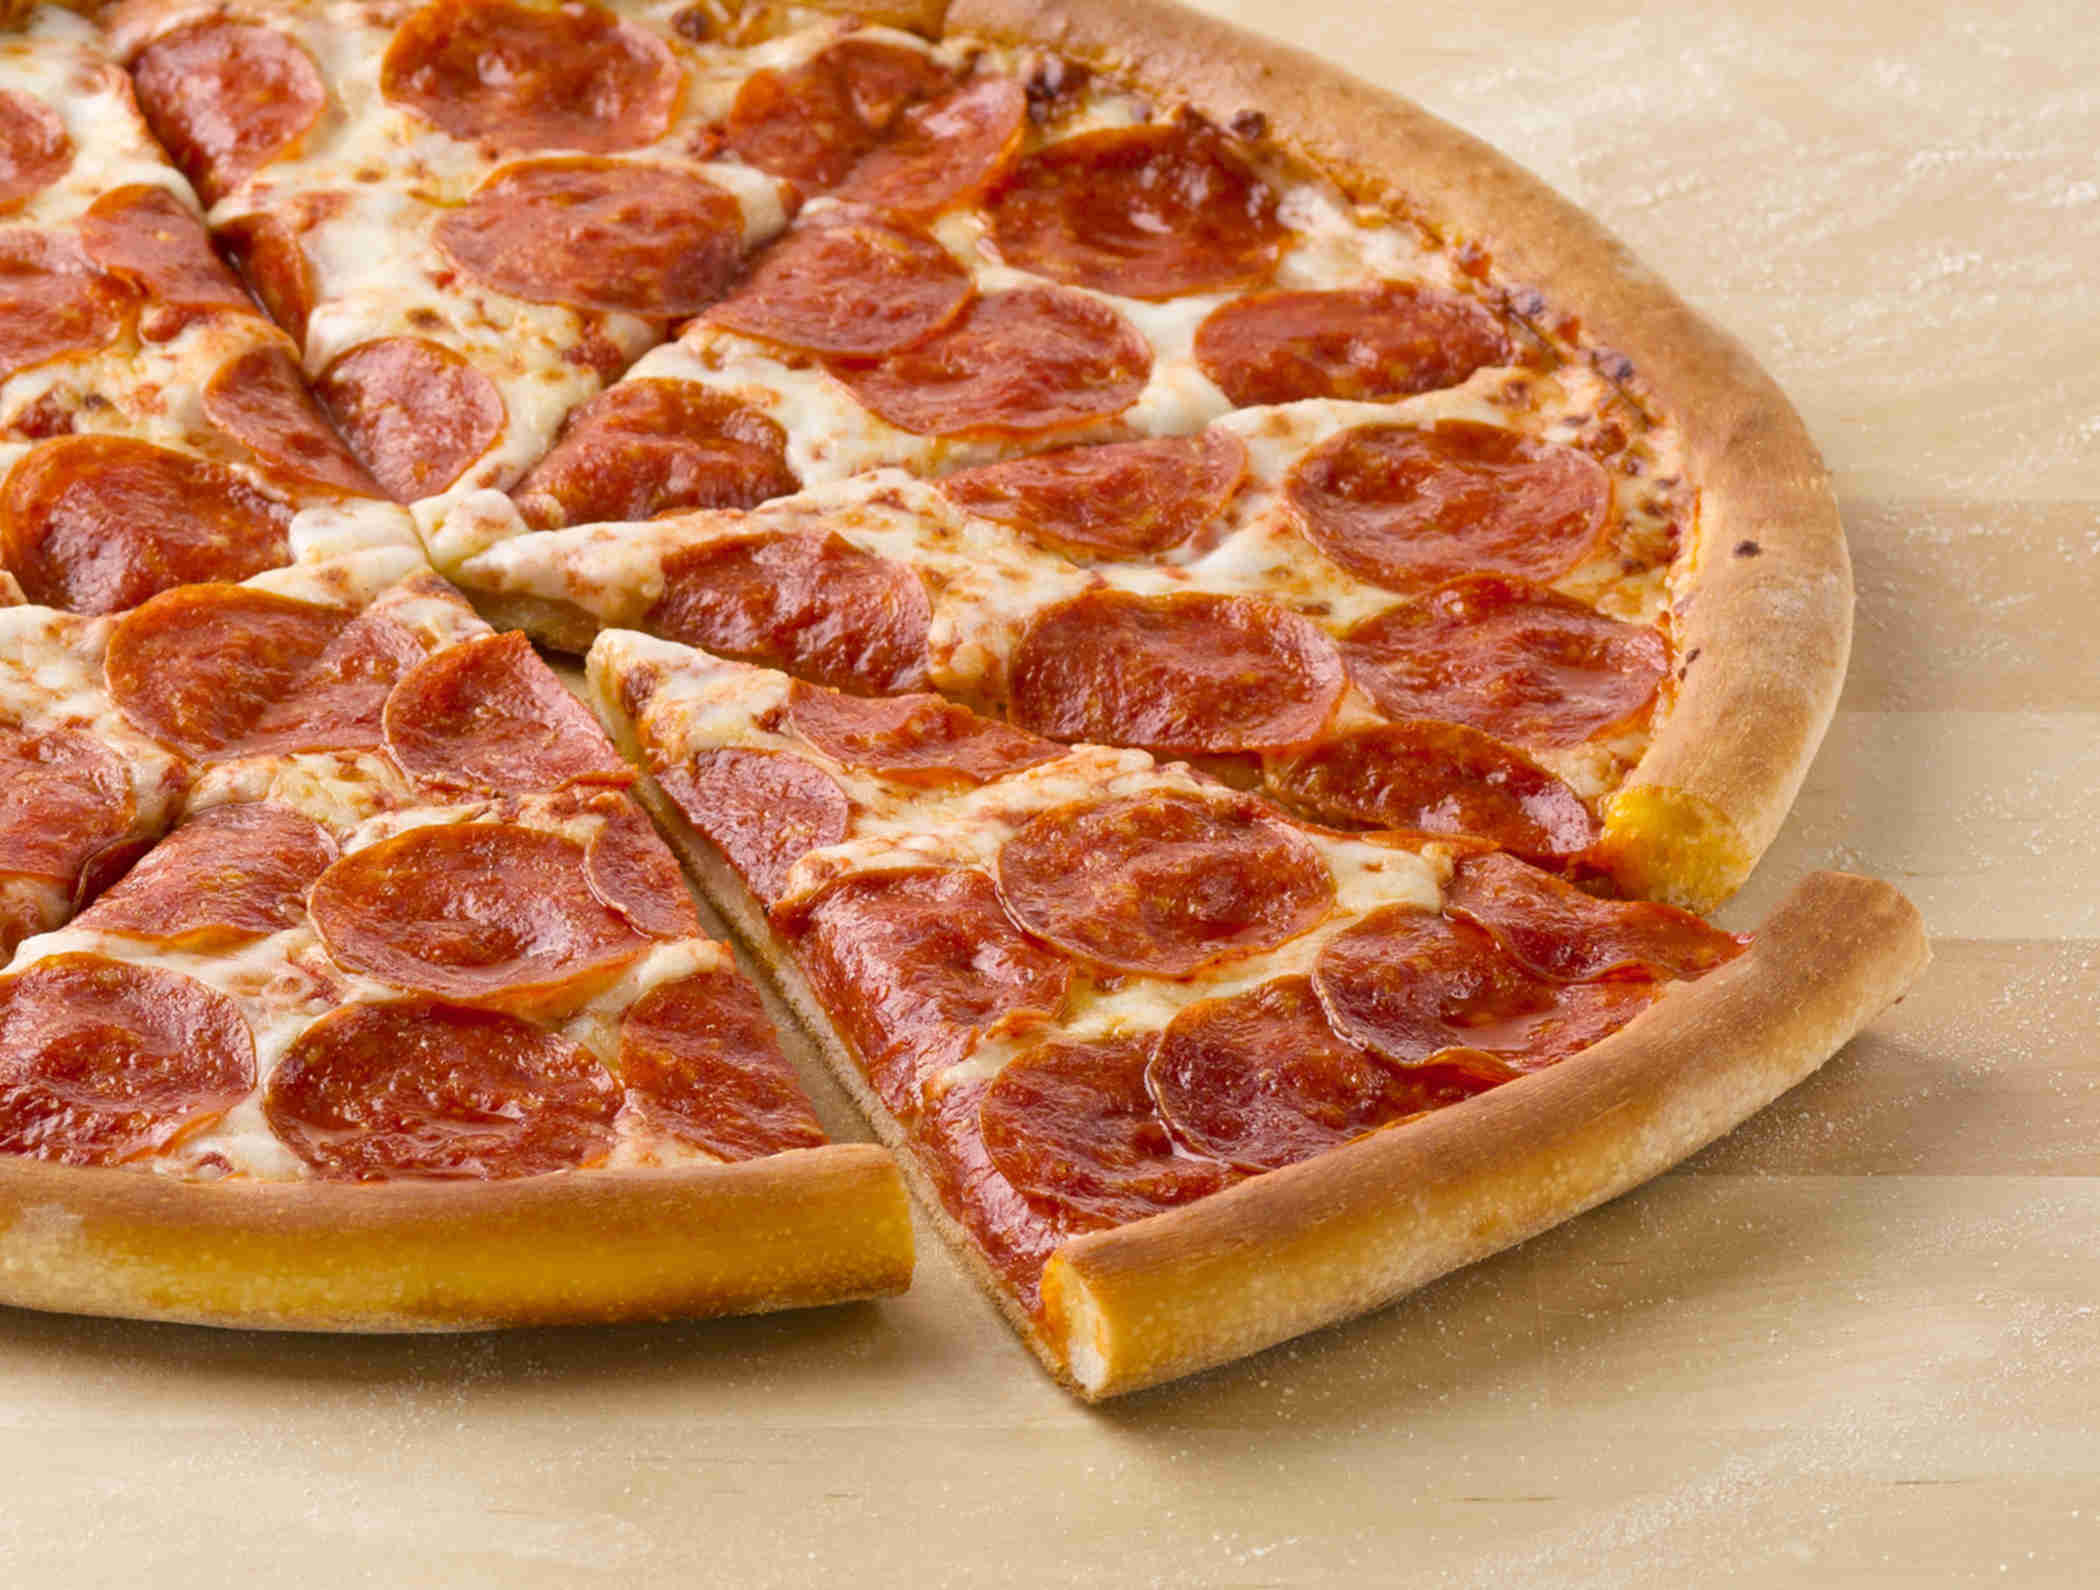 Today only! Save 50% on regularly priced pizzas at Papa John’s